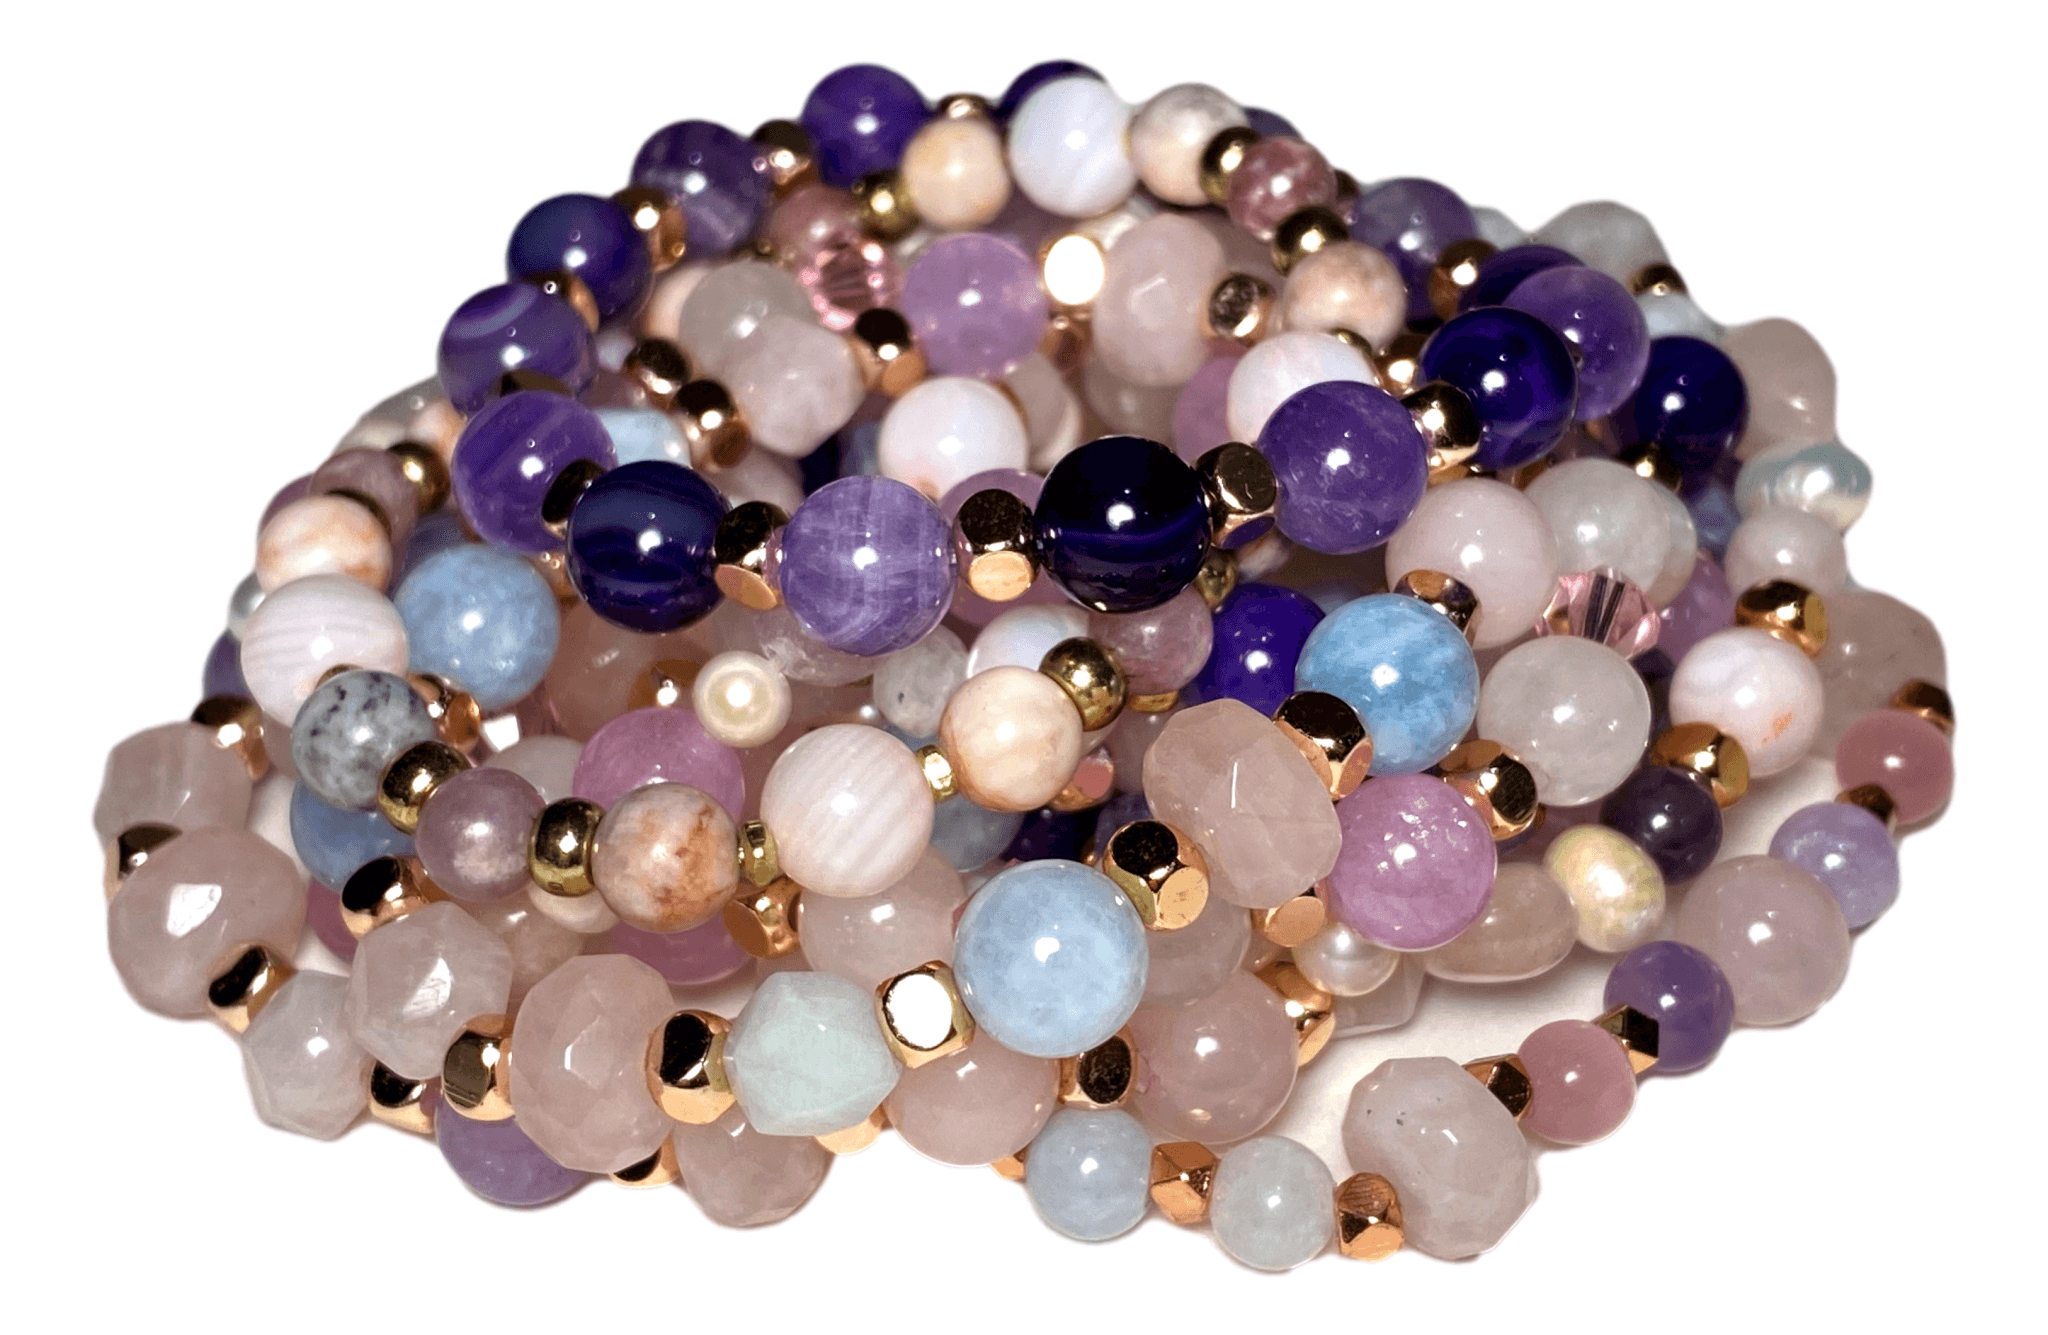 Bracelet Stretch Crystal Beads Purple Semi-precious Stone Beadstyles Select a Saint Handmade by Skilled Artisan 2 1/2 W Inches - Ysleta Mission Gift Shop- VOTED El Paso's Best Gift Shop